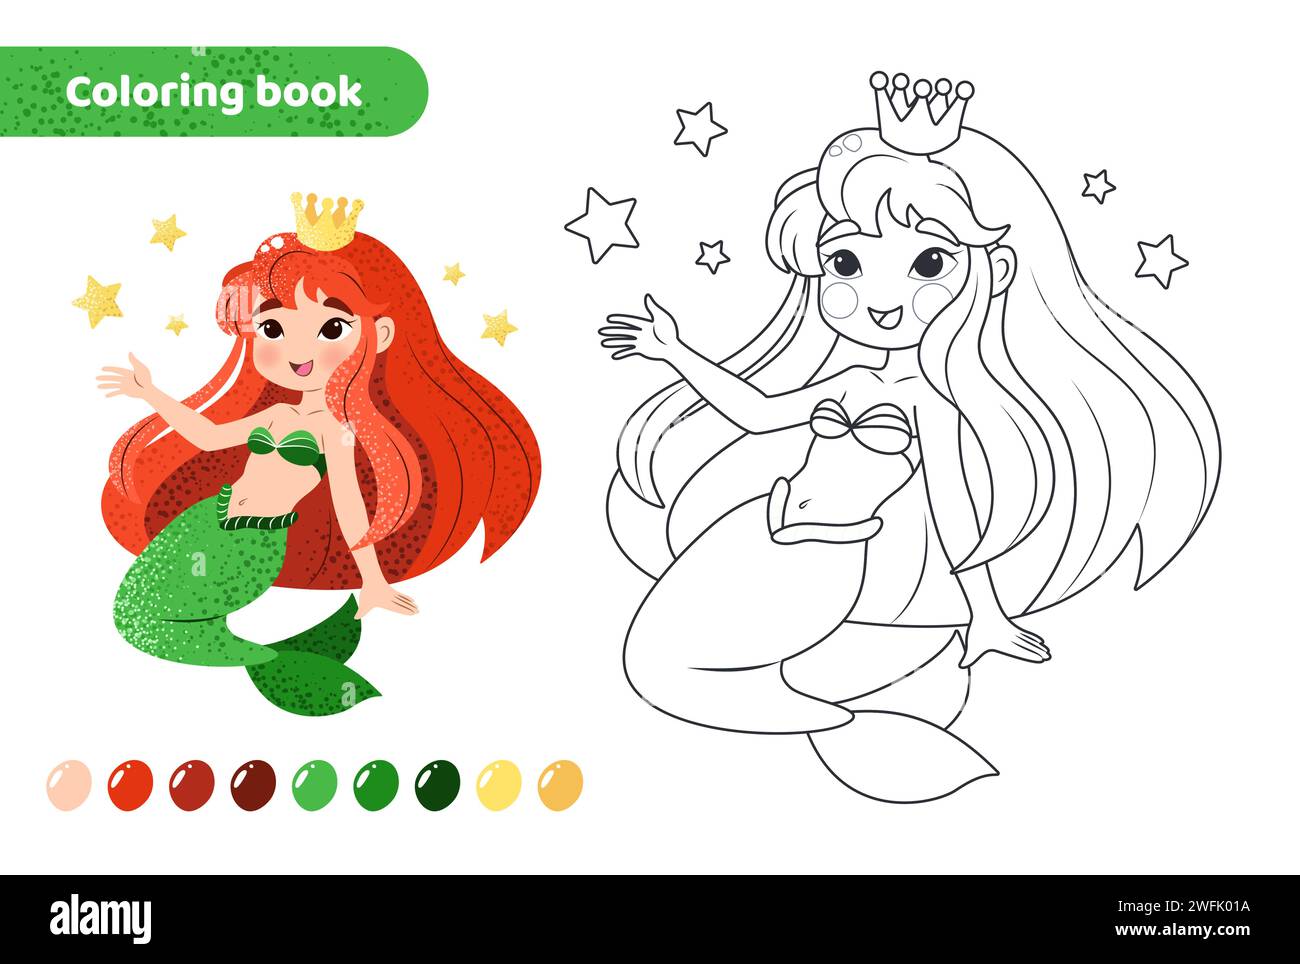 Coloring book for kids. Cute mermaid with stars. Stock Vector